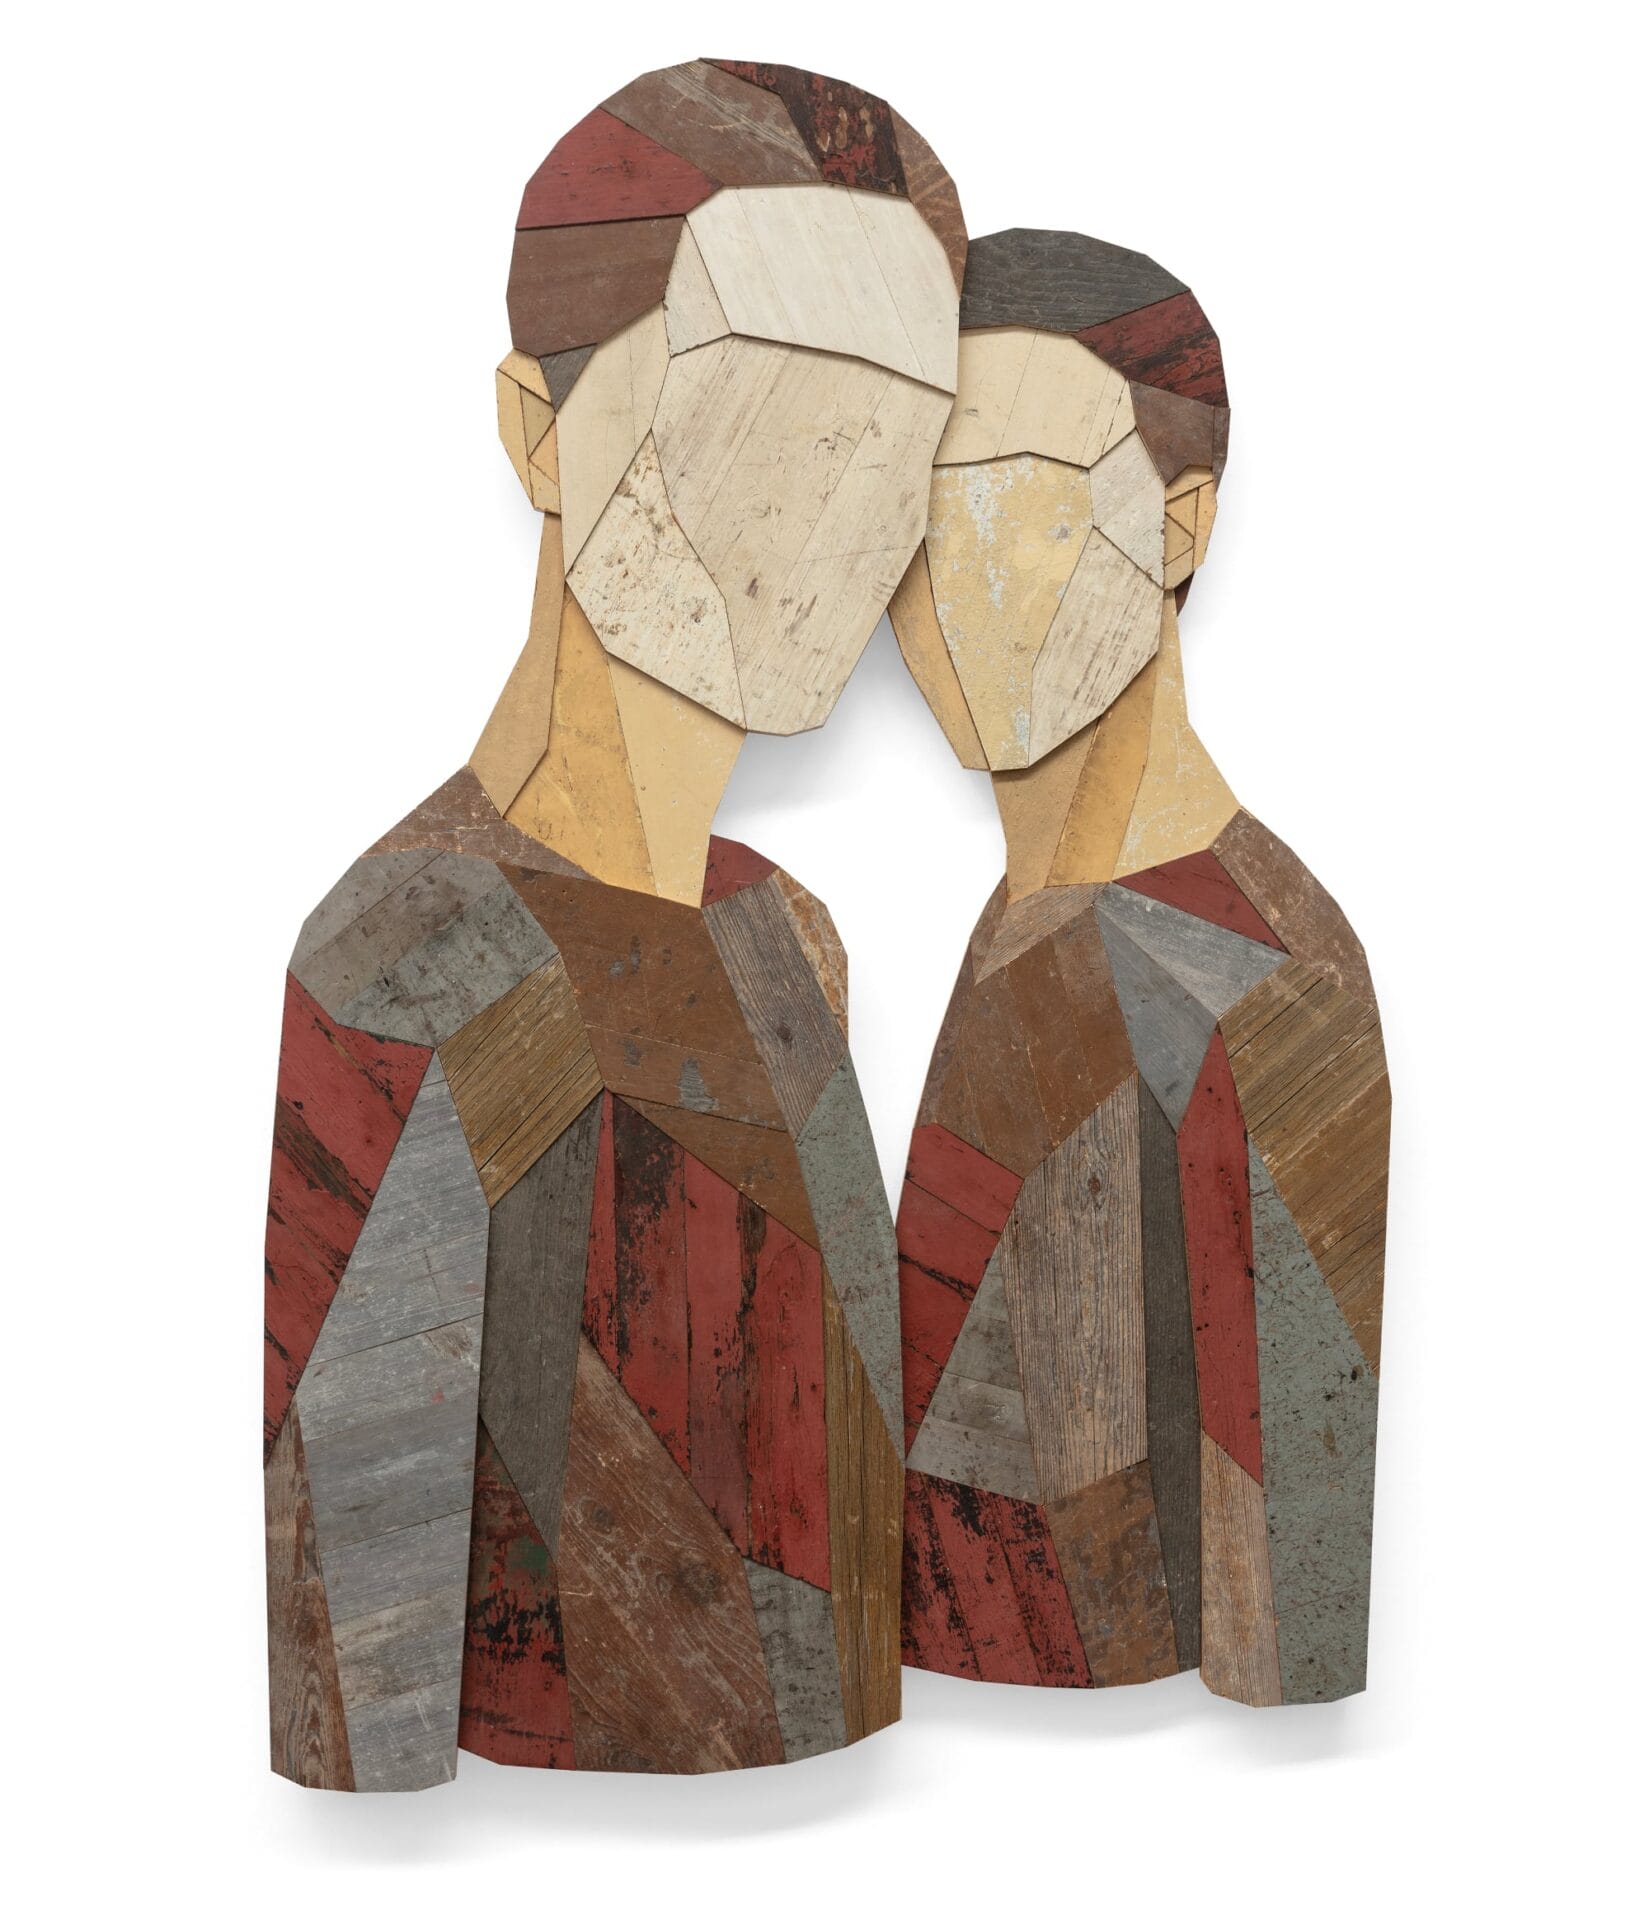 a portrait of two faceless figures made of collaged wood pieces